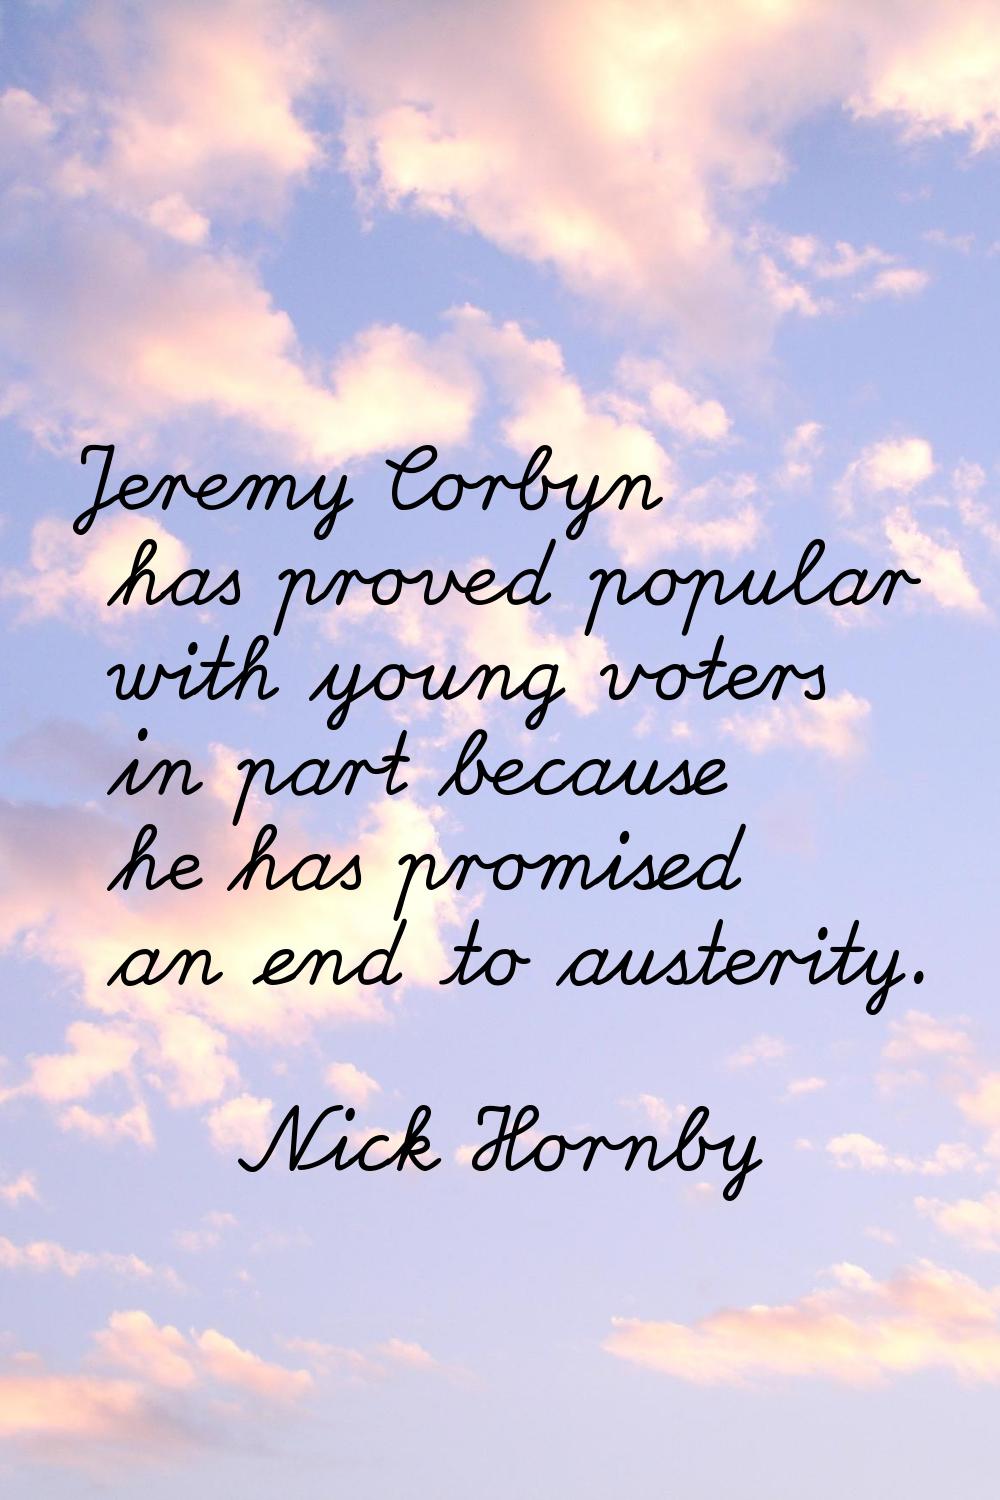 Jeremy Corbyn has proved popular with young voters in part because he has promised an end to auster